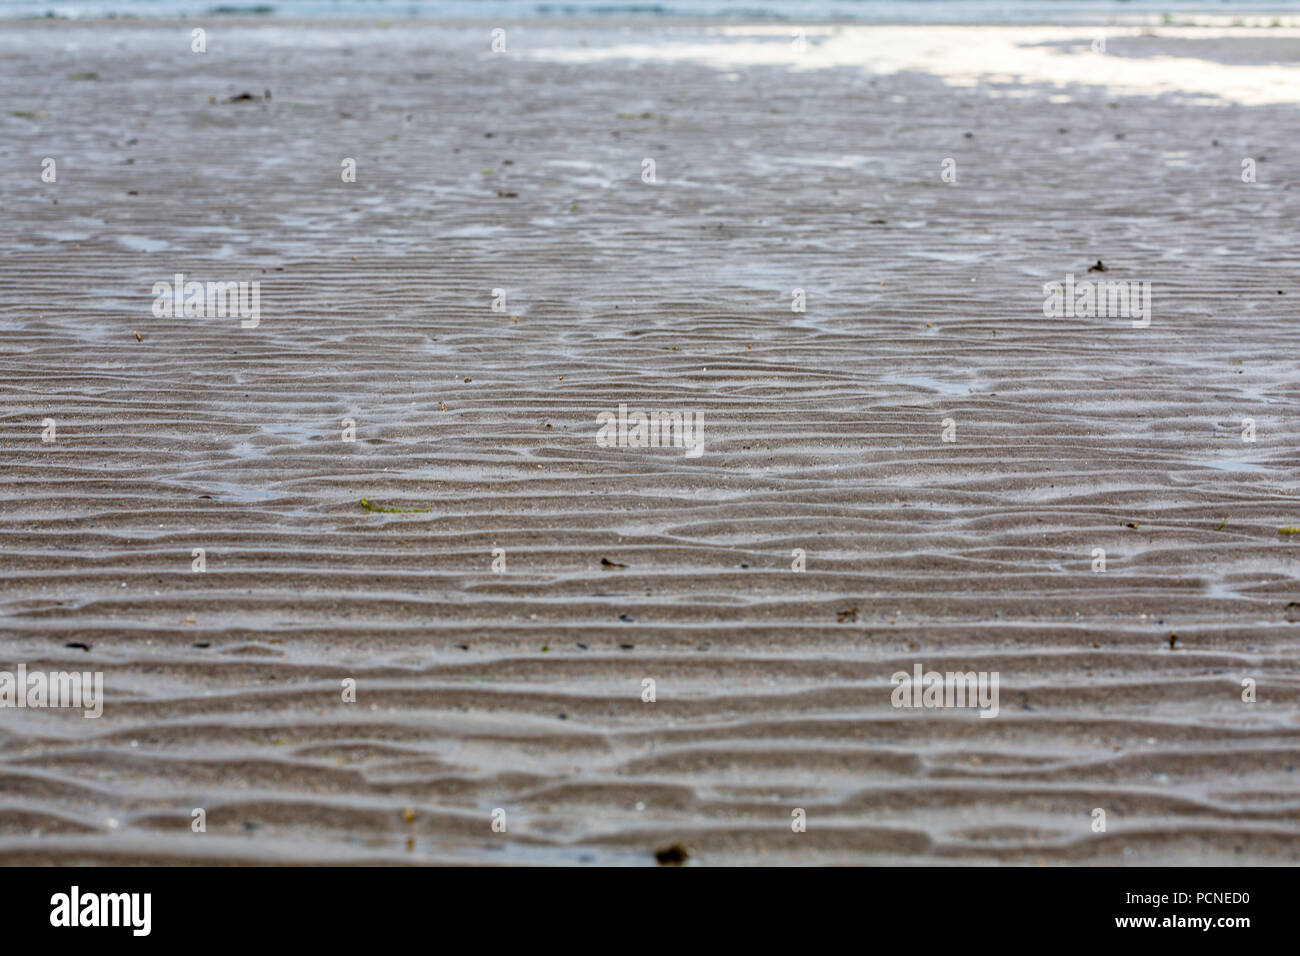 lugworm casts in sand on beach, Traeth Crydall in Rhosneigr, Anglesey, North Wales, UK Stock Photo